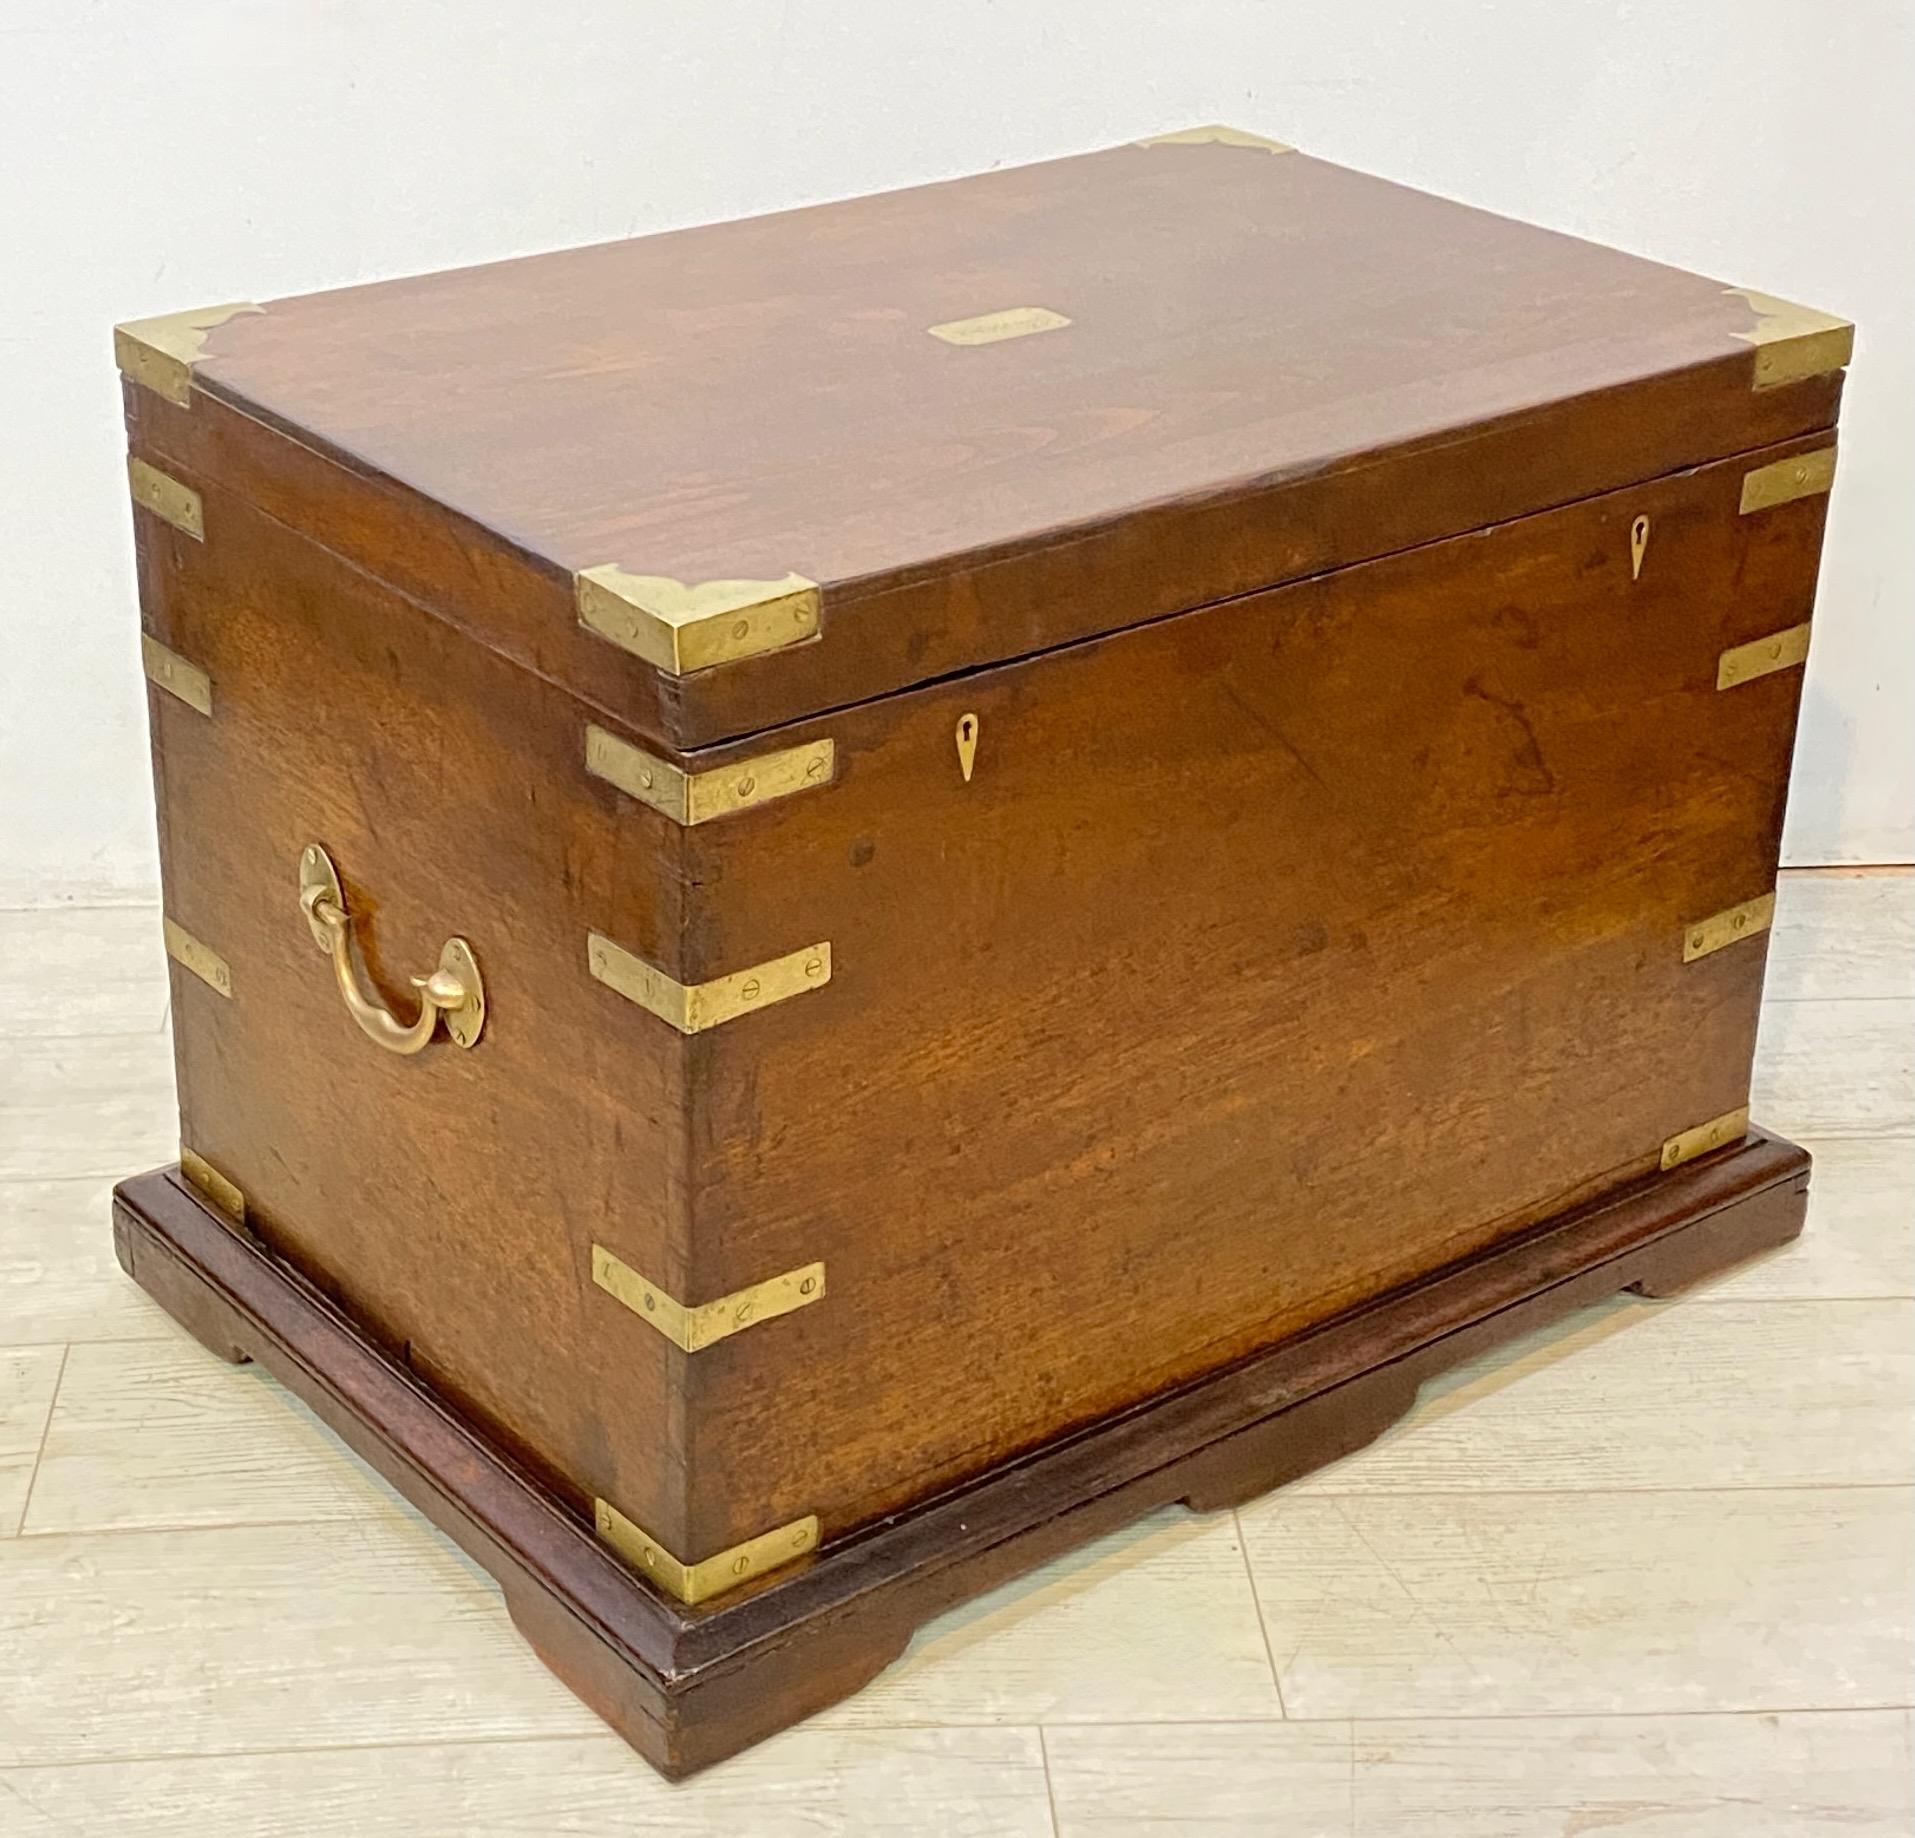 An Early to Mid 19th century Chinese export mahogany chest with inset brass corners and brass hardware.
Originally this had an internal removable tray (missing), otherwise in very good antique condition.
Makes an attractive table as well as useful